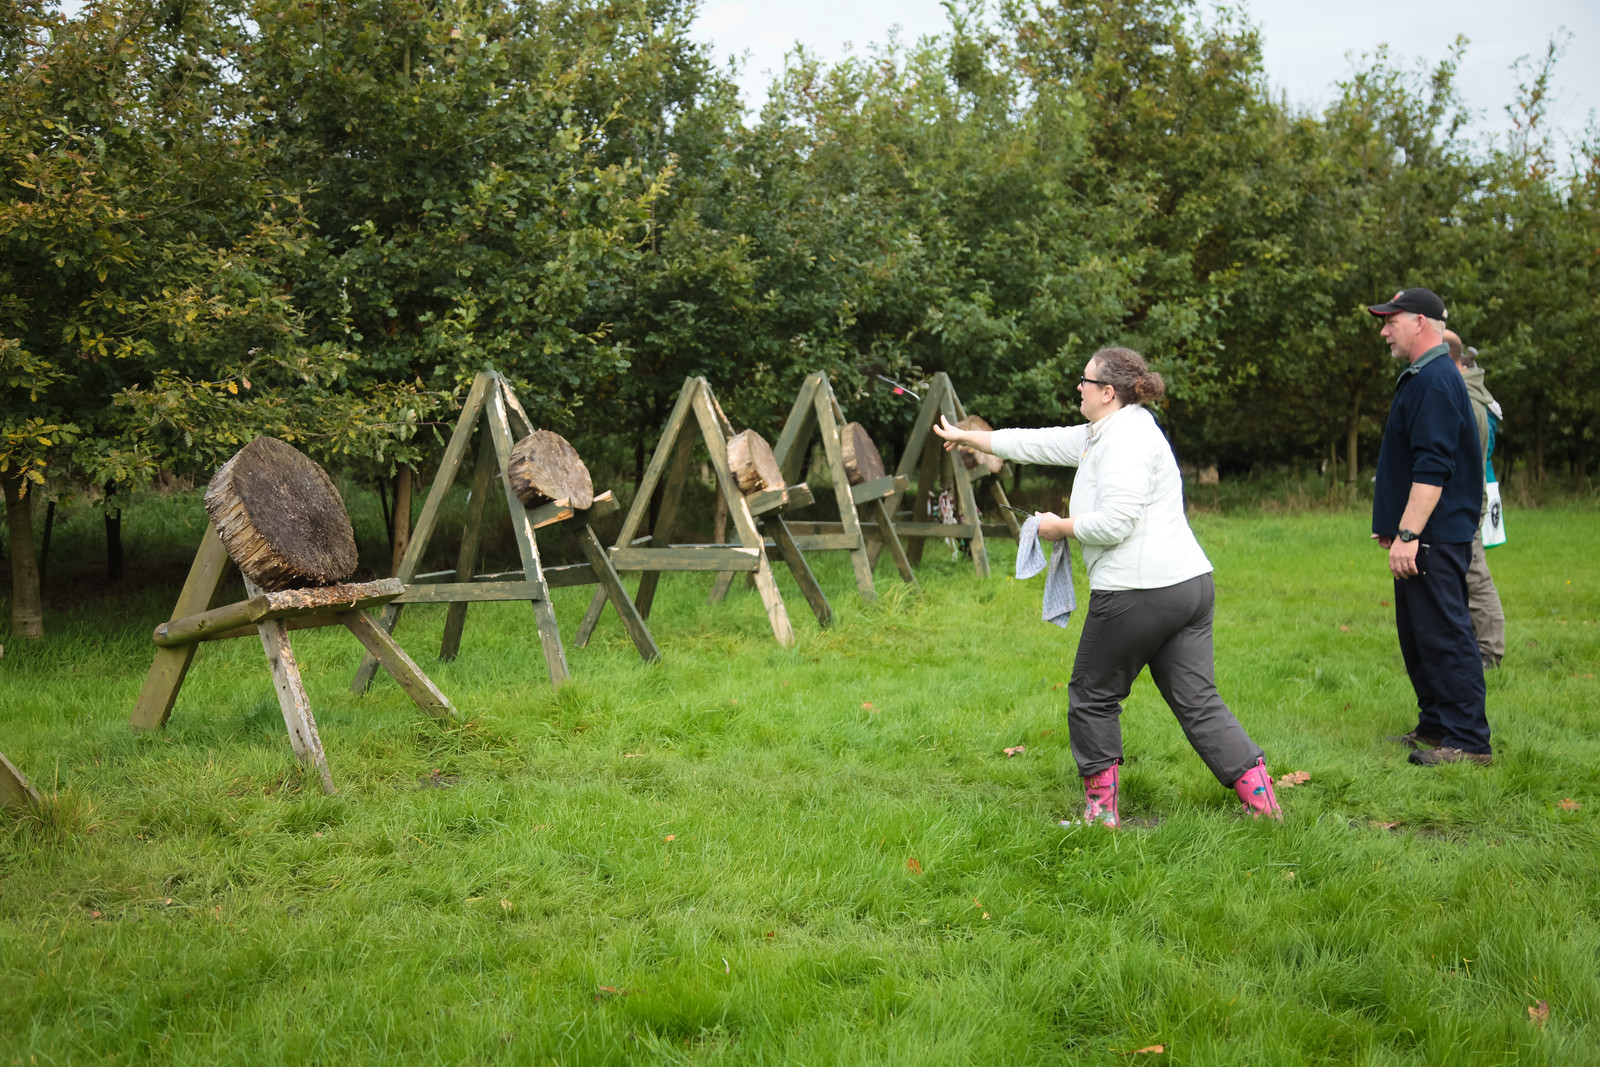 Tomahawk Throwing Course (14th September 2020)